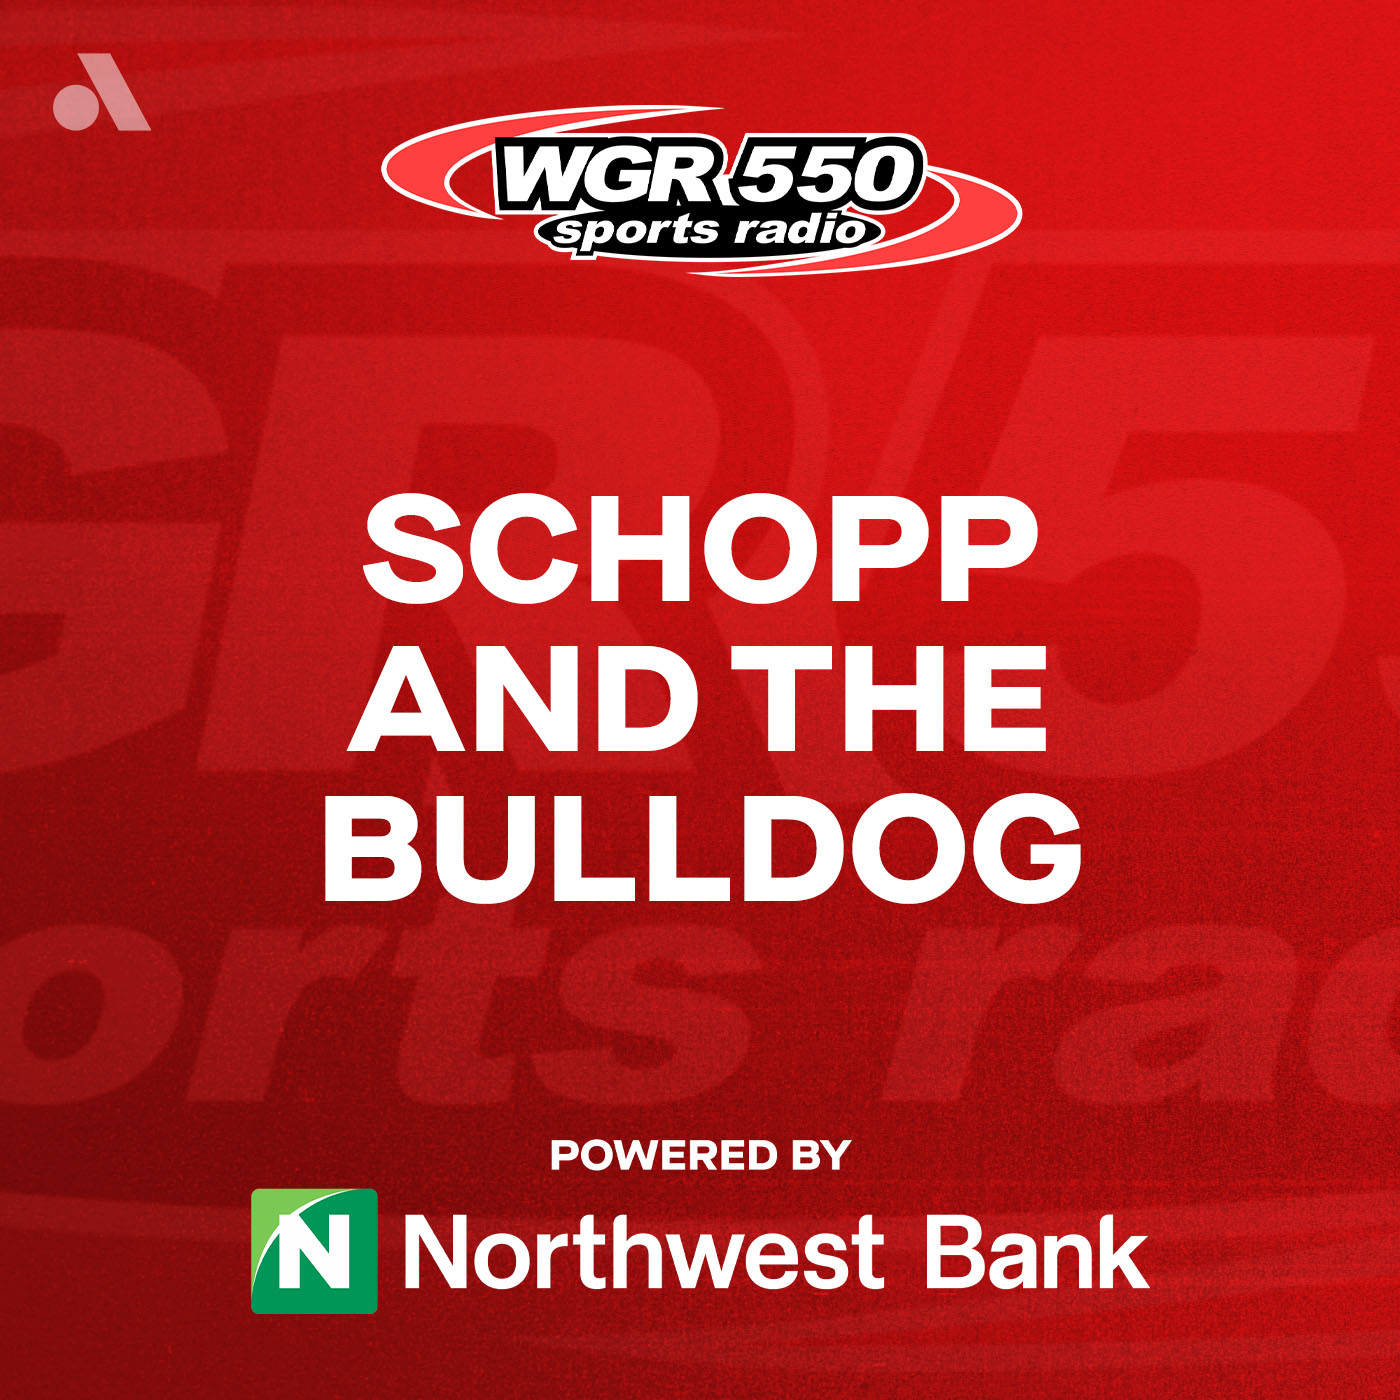 Schopp and the Bulldog Full Show for 03-26